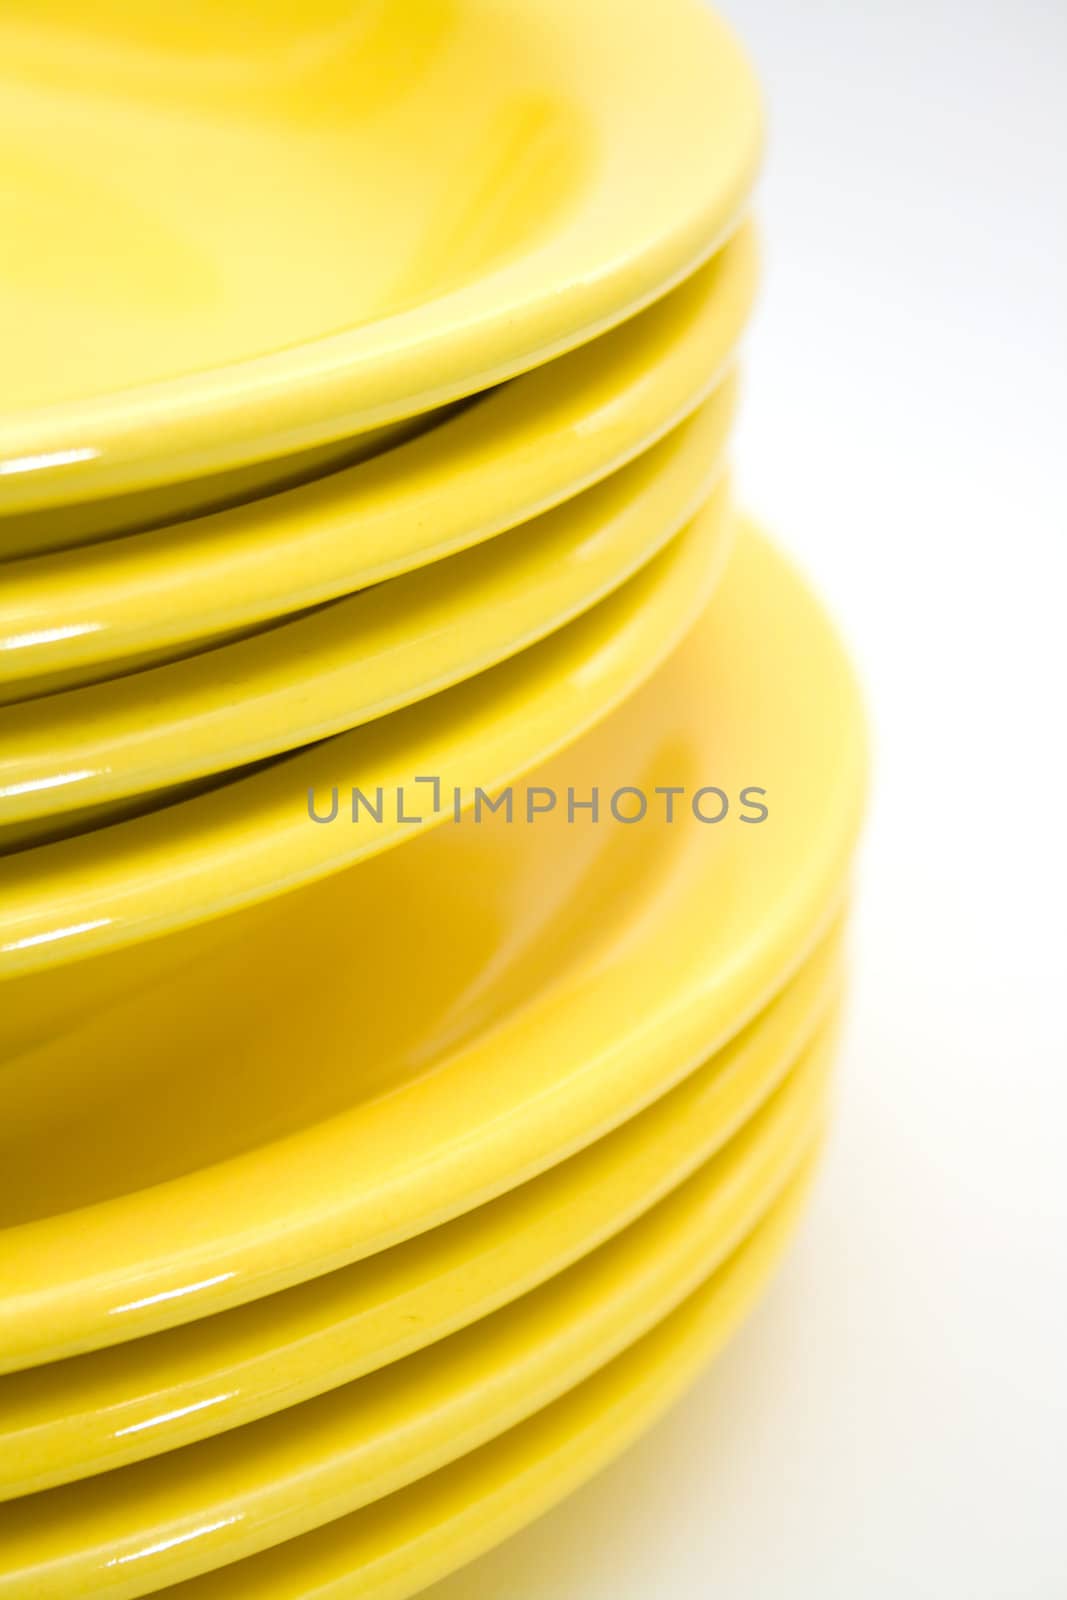 Stack of yellow plates by nubephoto